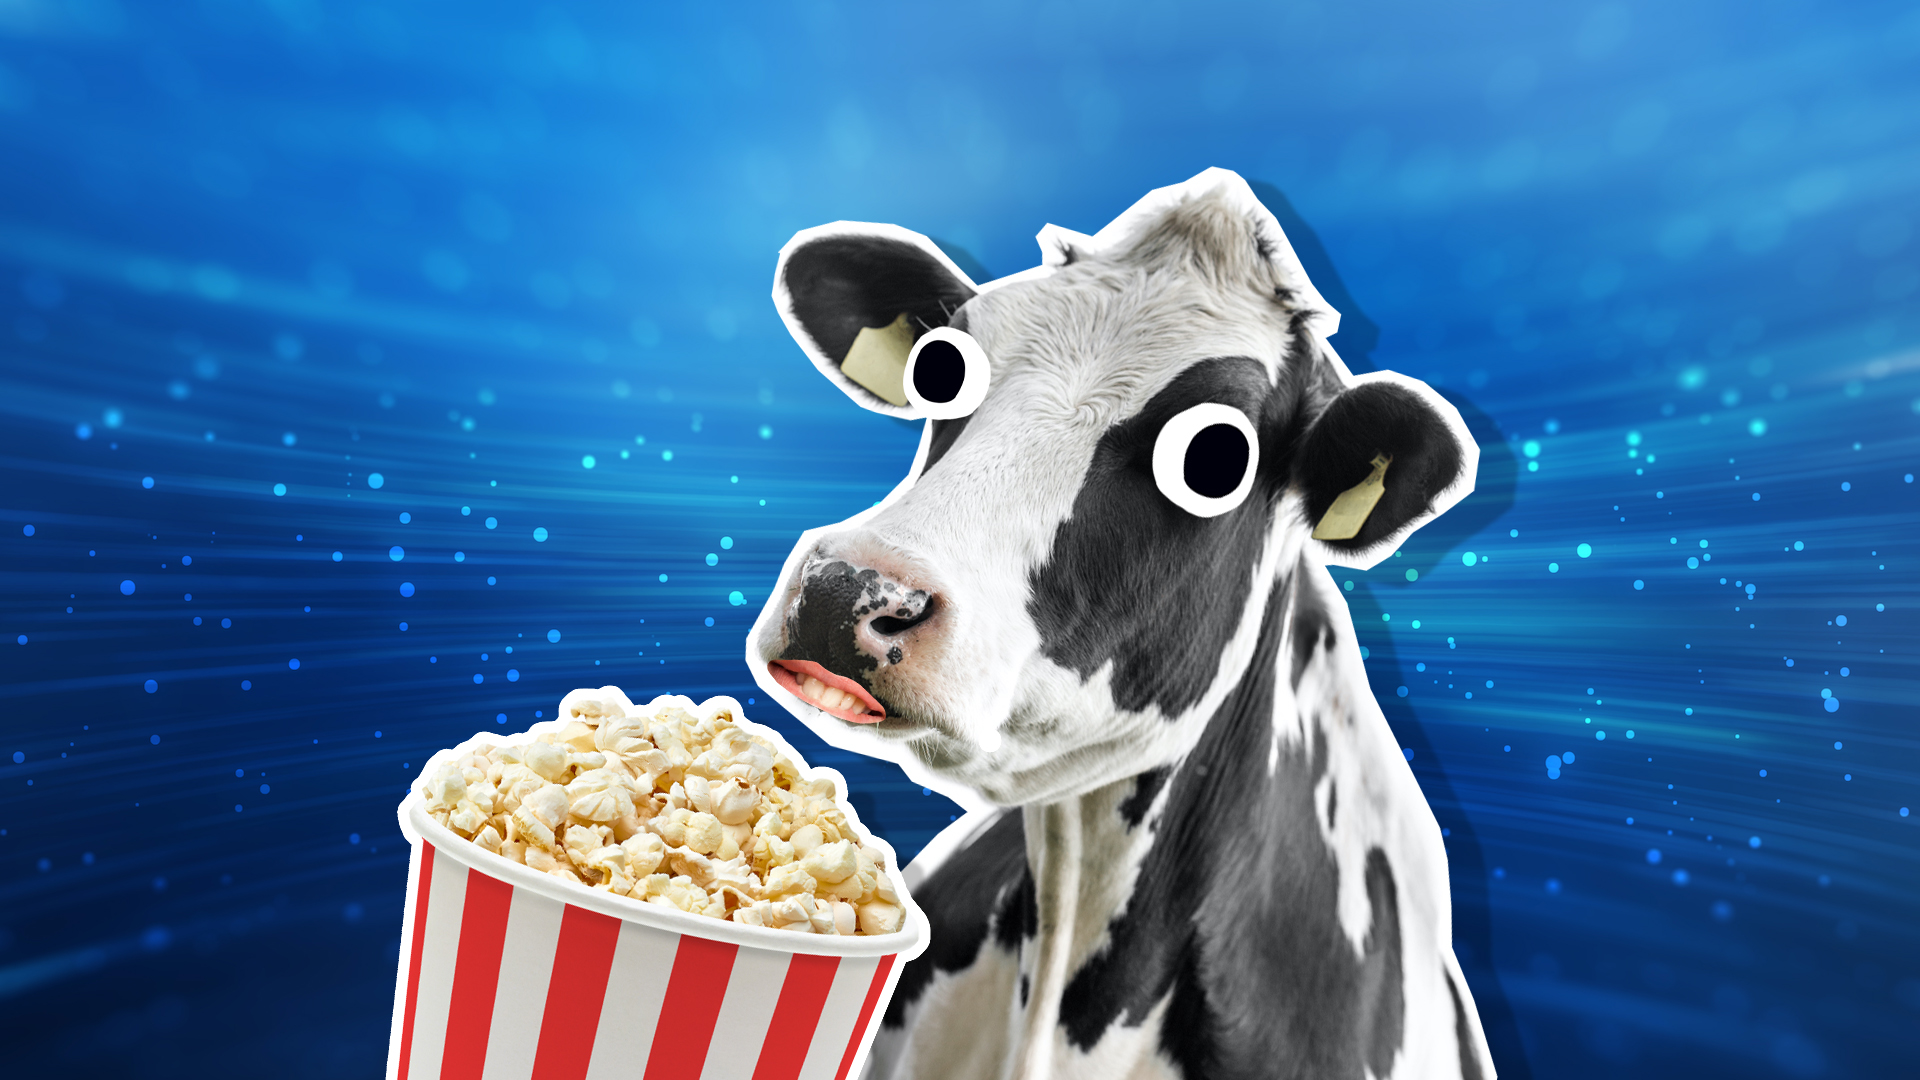 A black and white cow eating popcorn